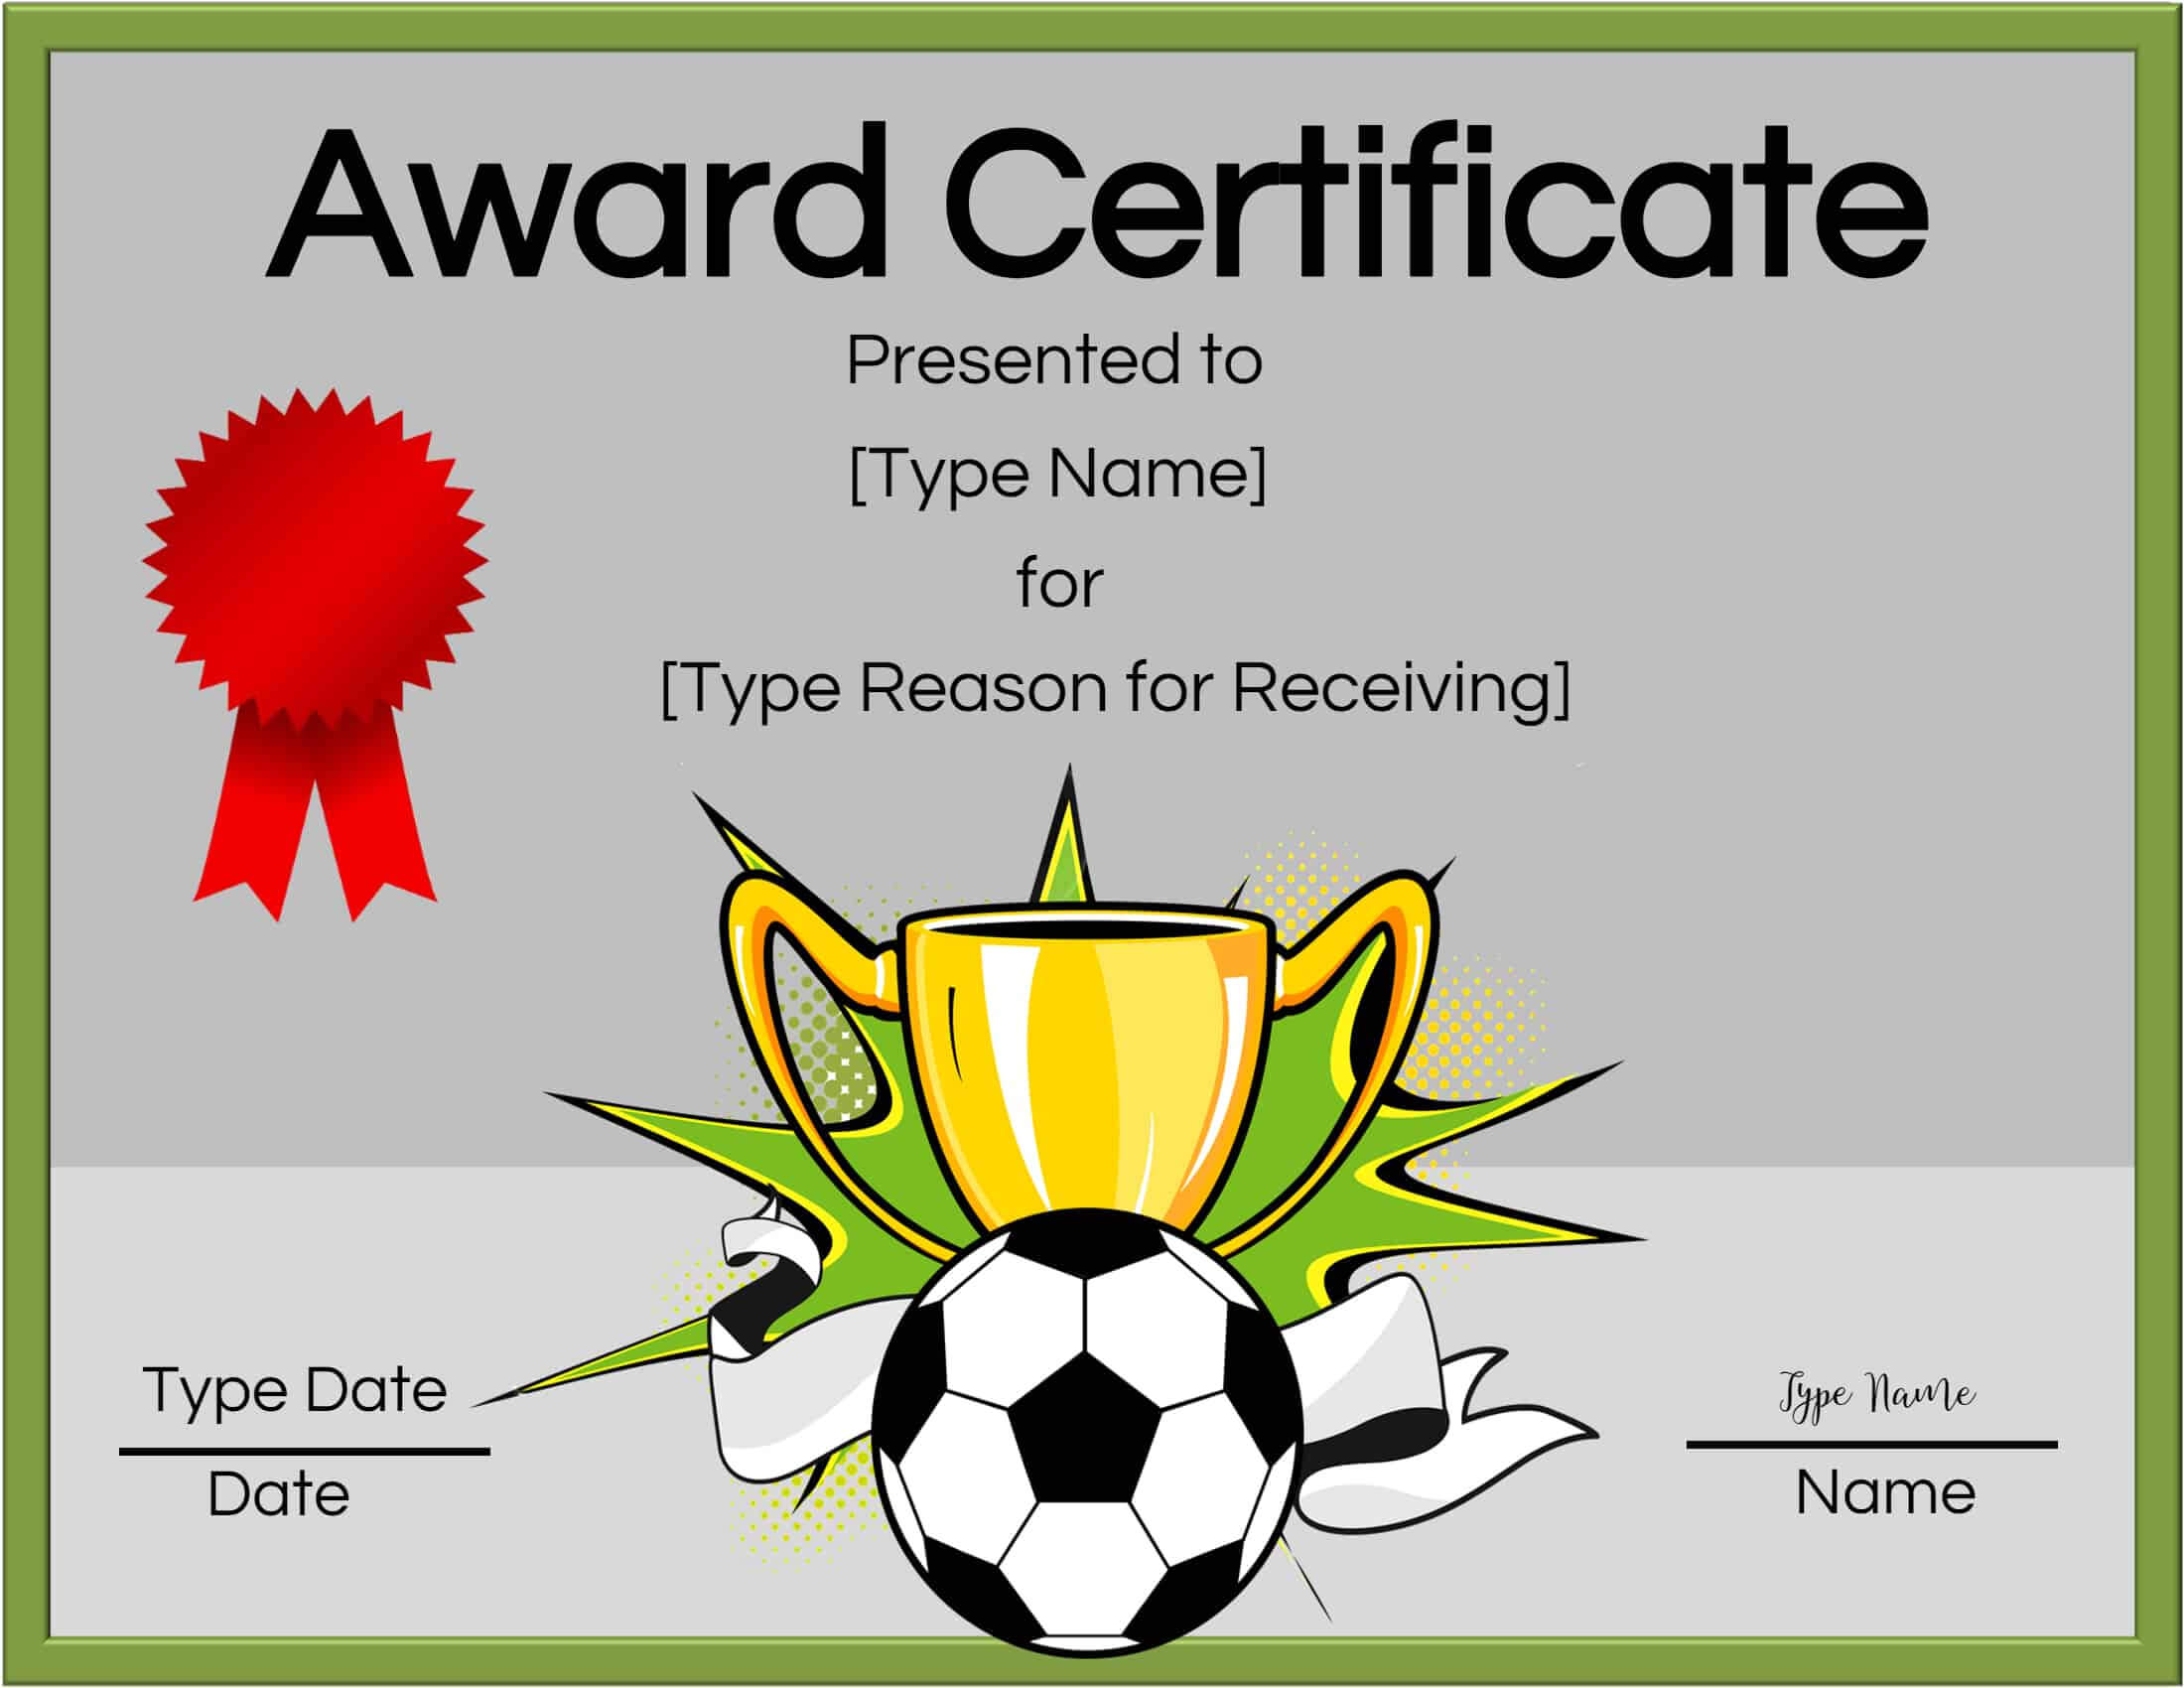 Free Soccer Certificate Maker | Edit Online And Print At Home For Soccer Certificate Template Free